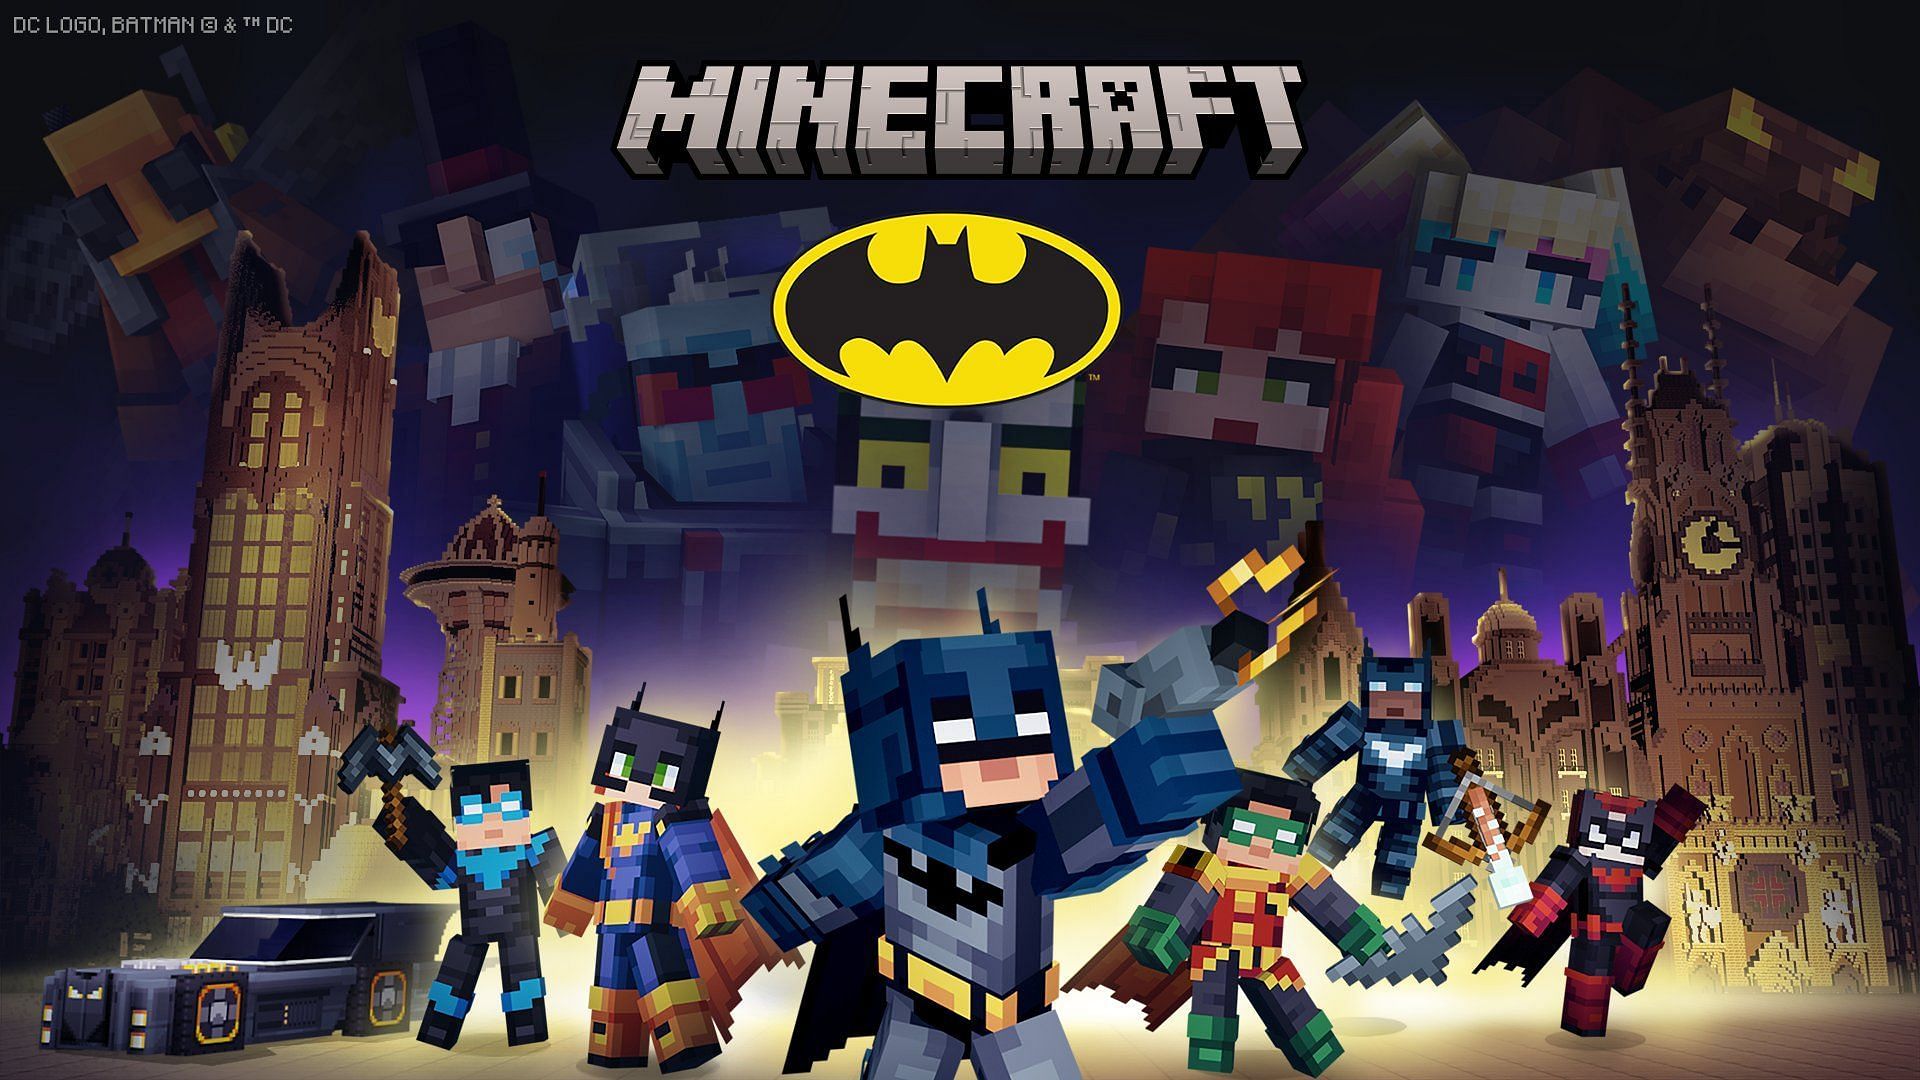 Minecraft x Gotham Knights DLC announced: Release date, features, and more